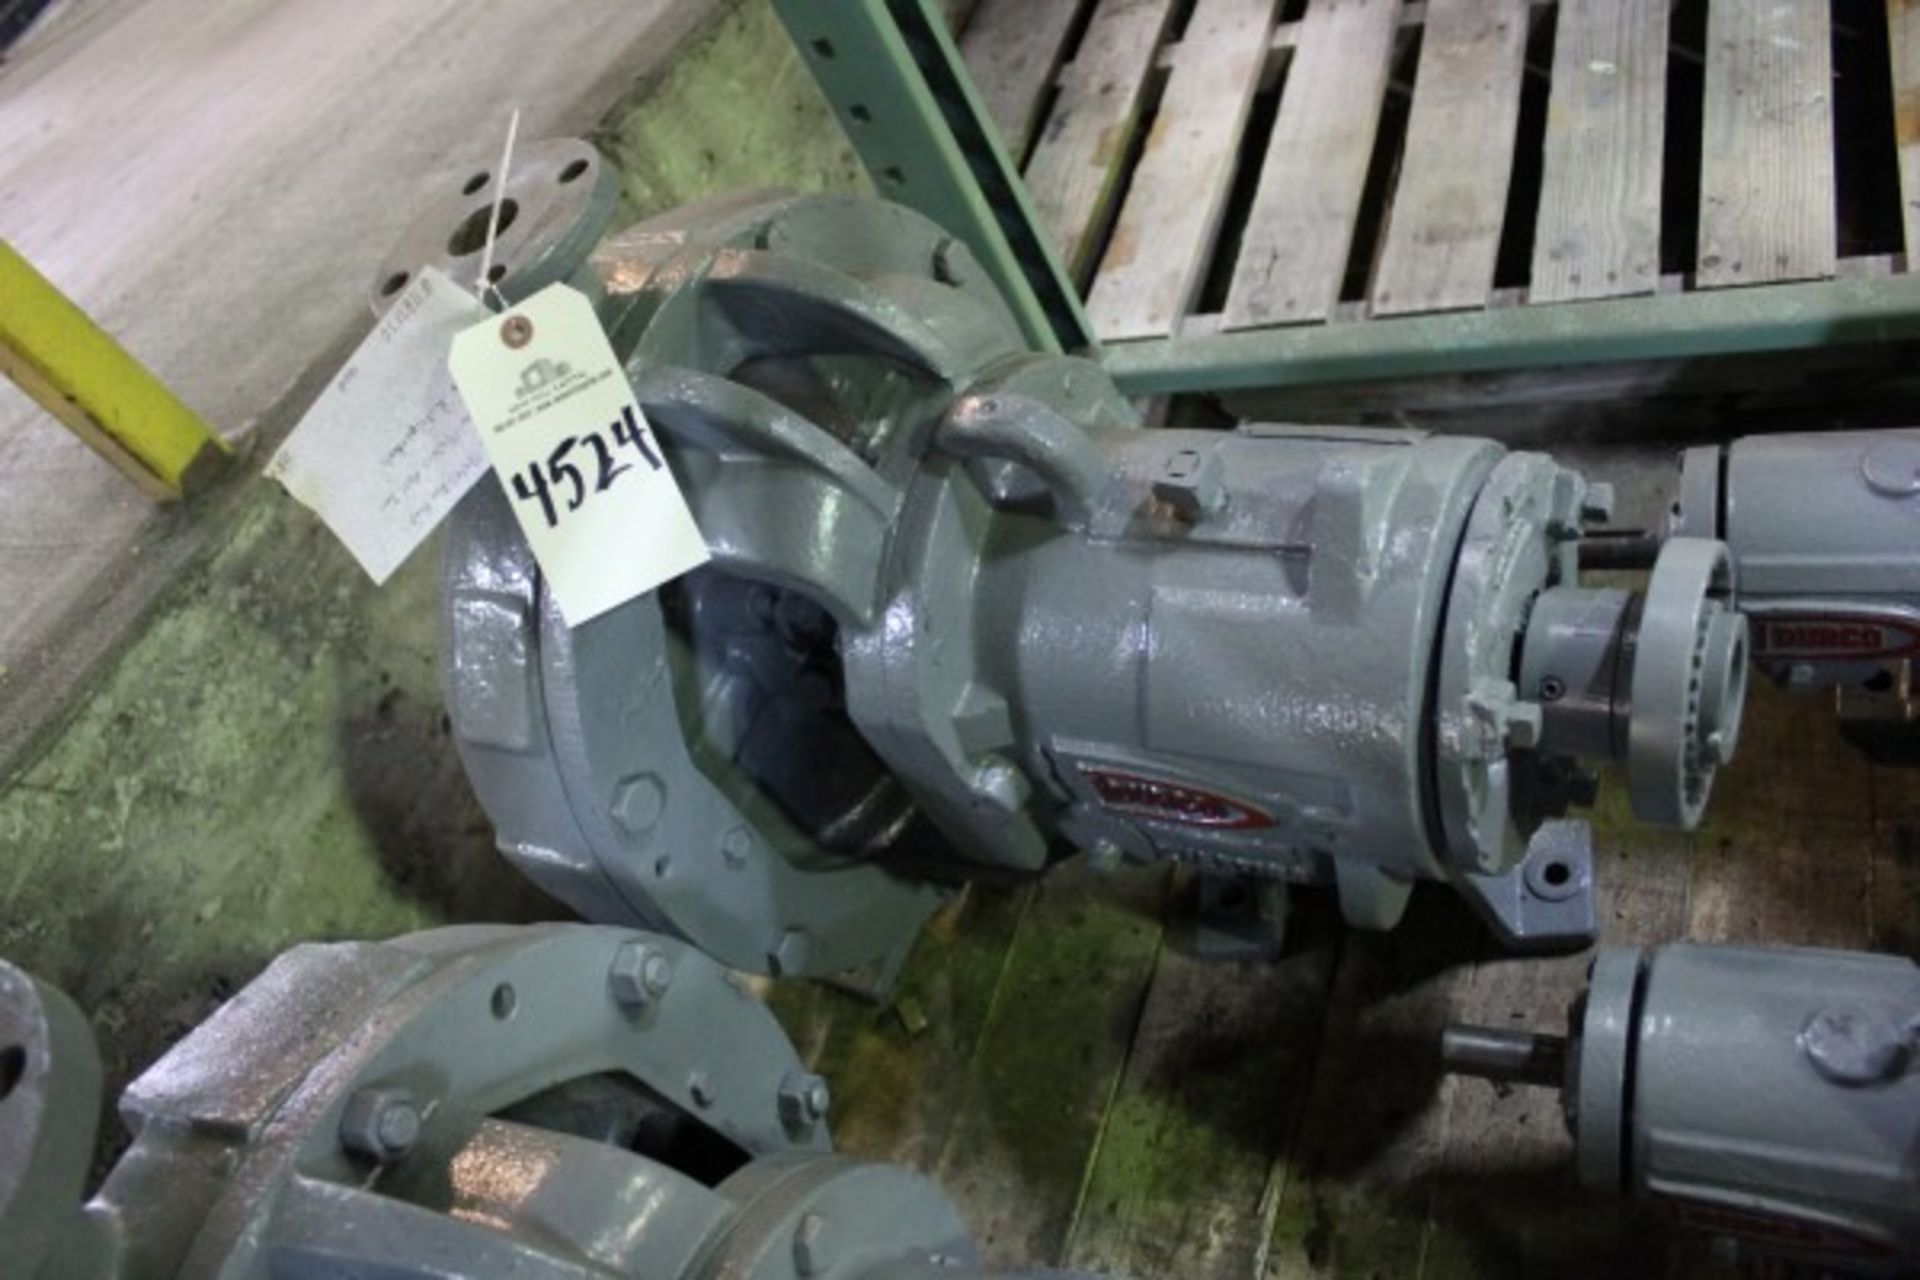 Durco Mark III, 1.5 x 3 -13 Iron Pump | Seller to load for $10 per lot or buyers may remove hand